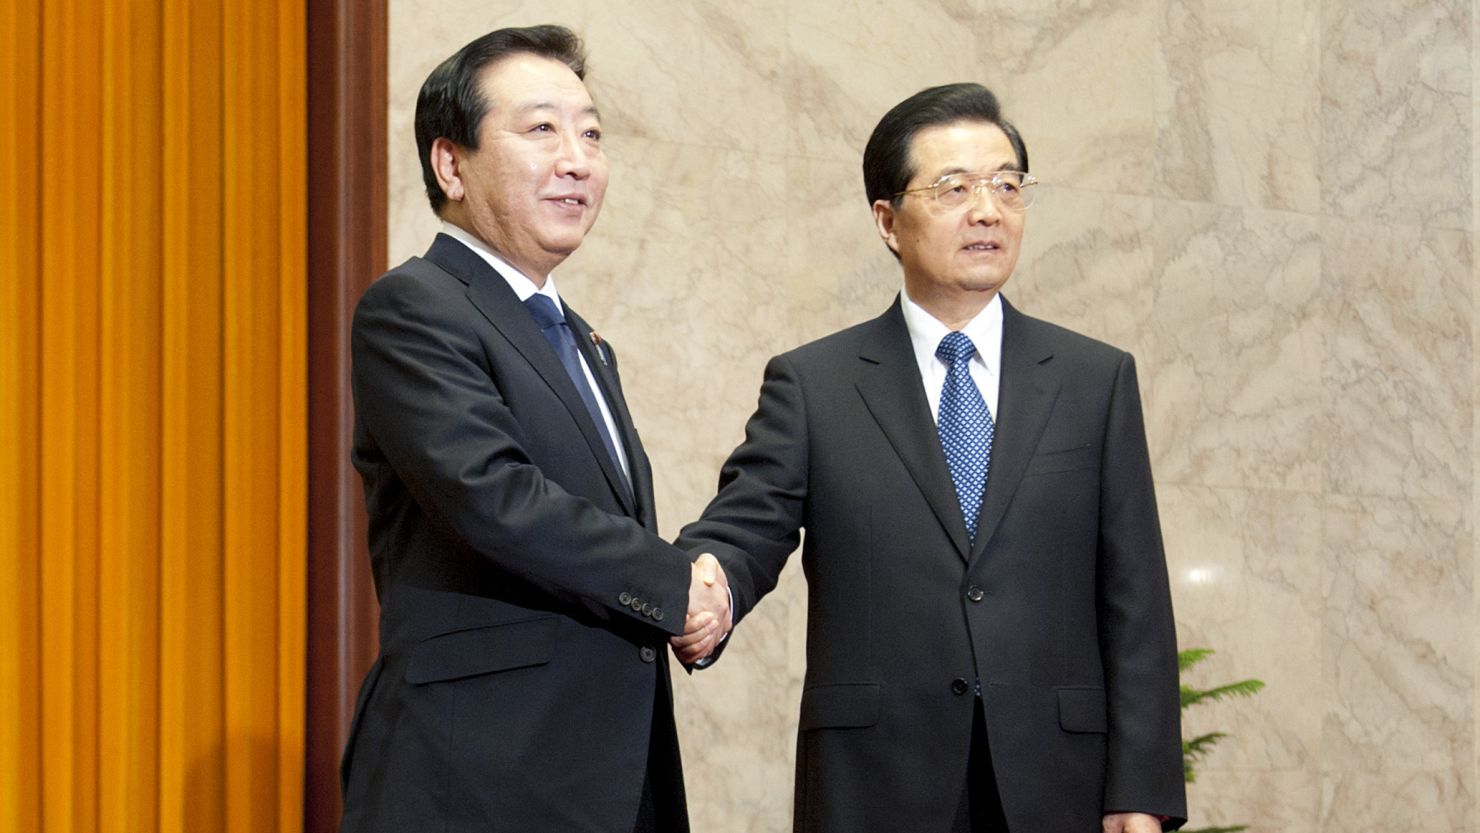 Japan's Prime Minister Yoshihiko Noda, left, shakes hands with China's President Hu Jintao in Beijing on Monday.